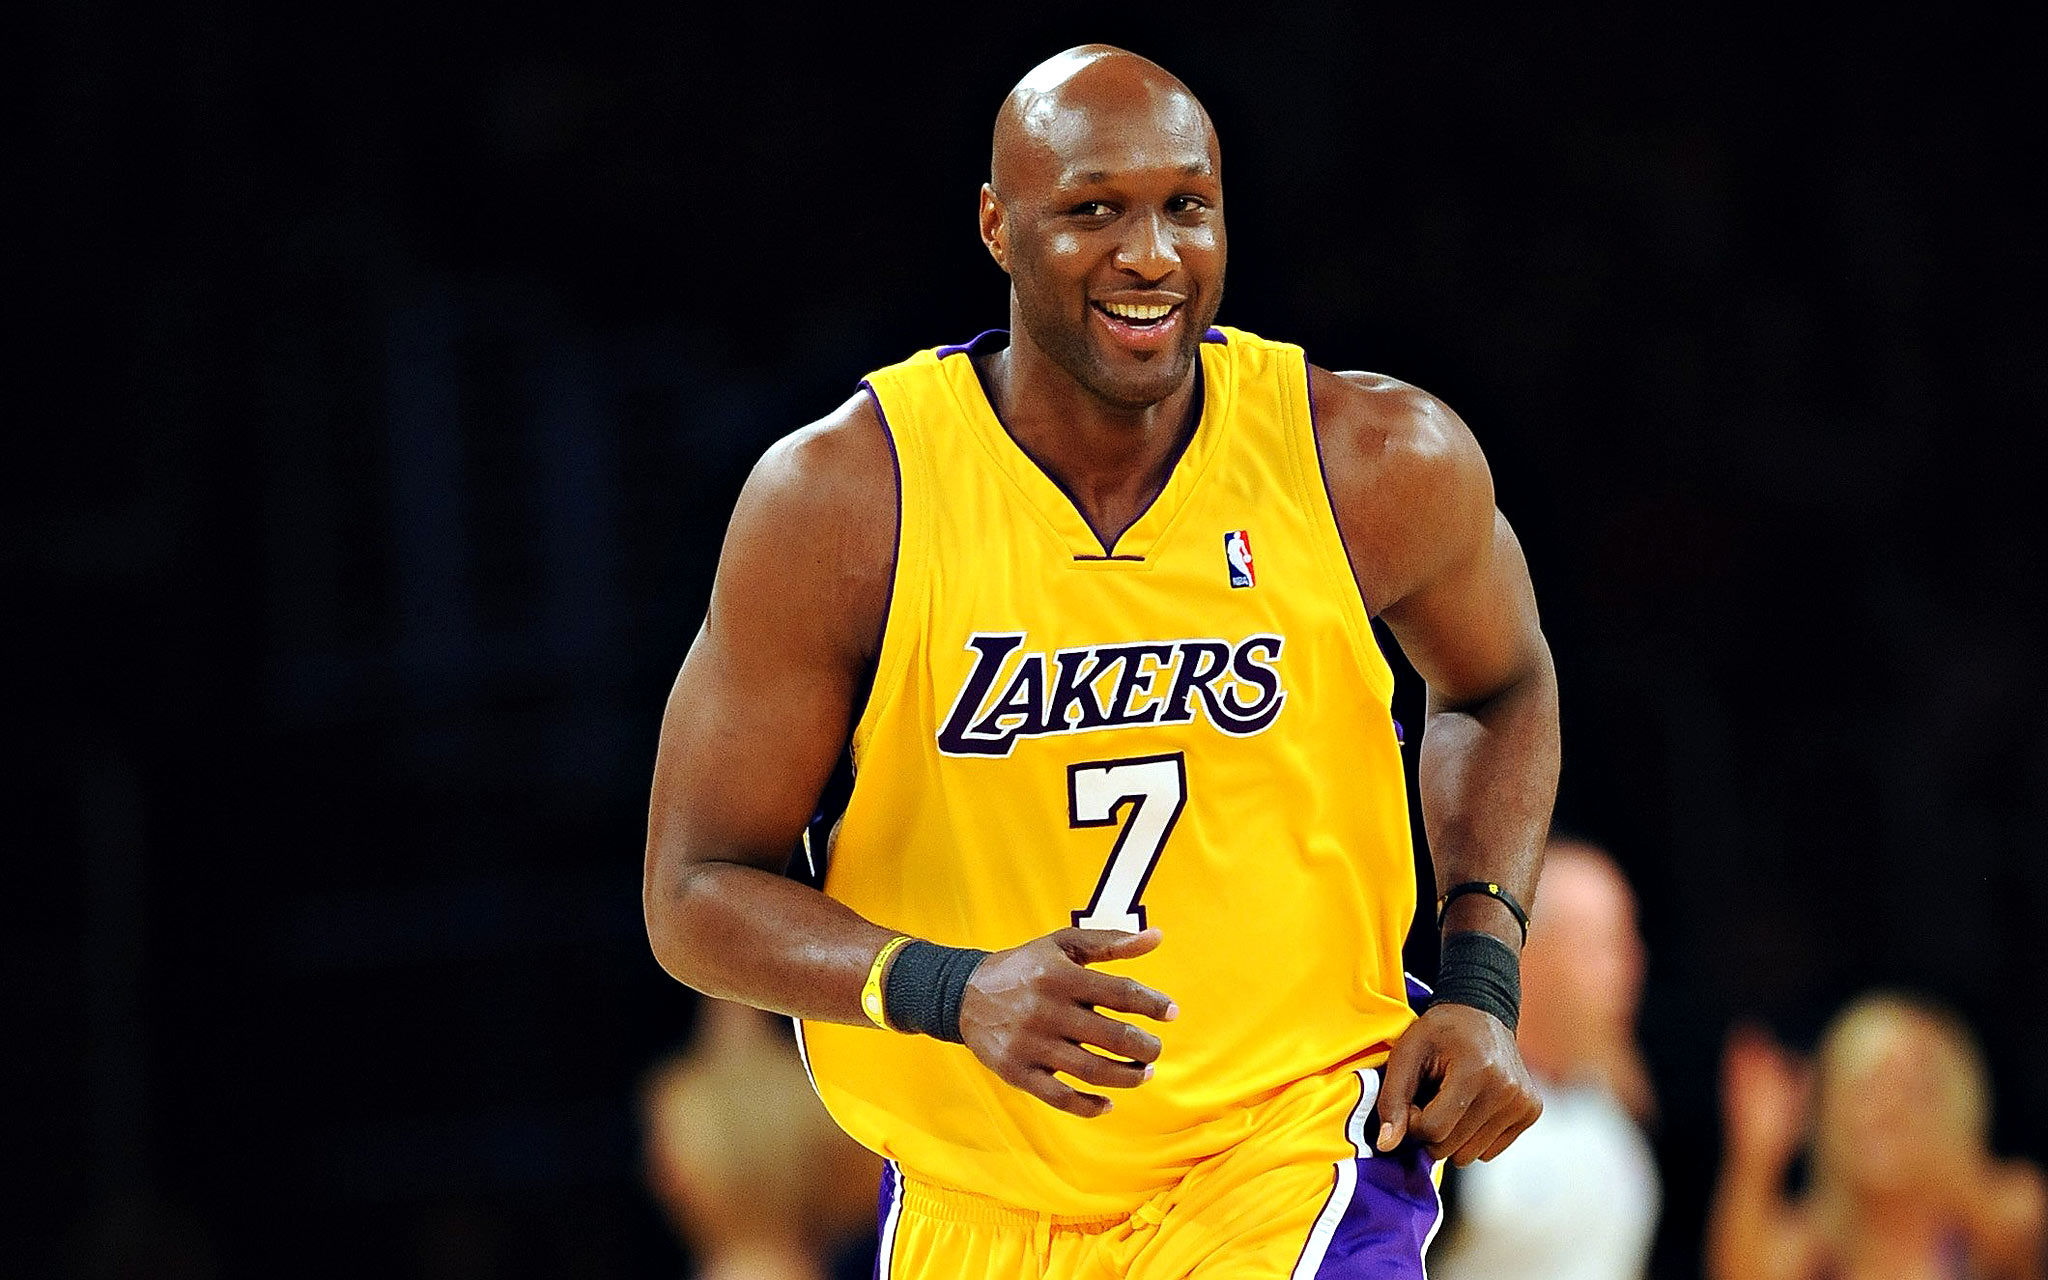 Lamar Odom was destined for a life of sadness and failure, having star